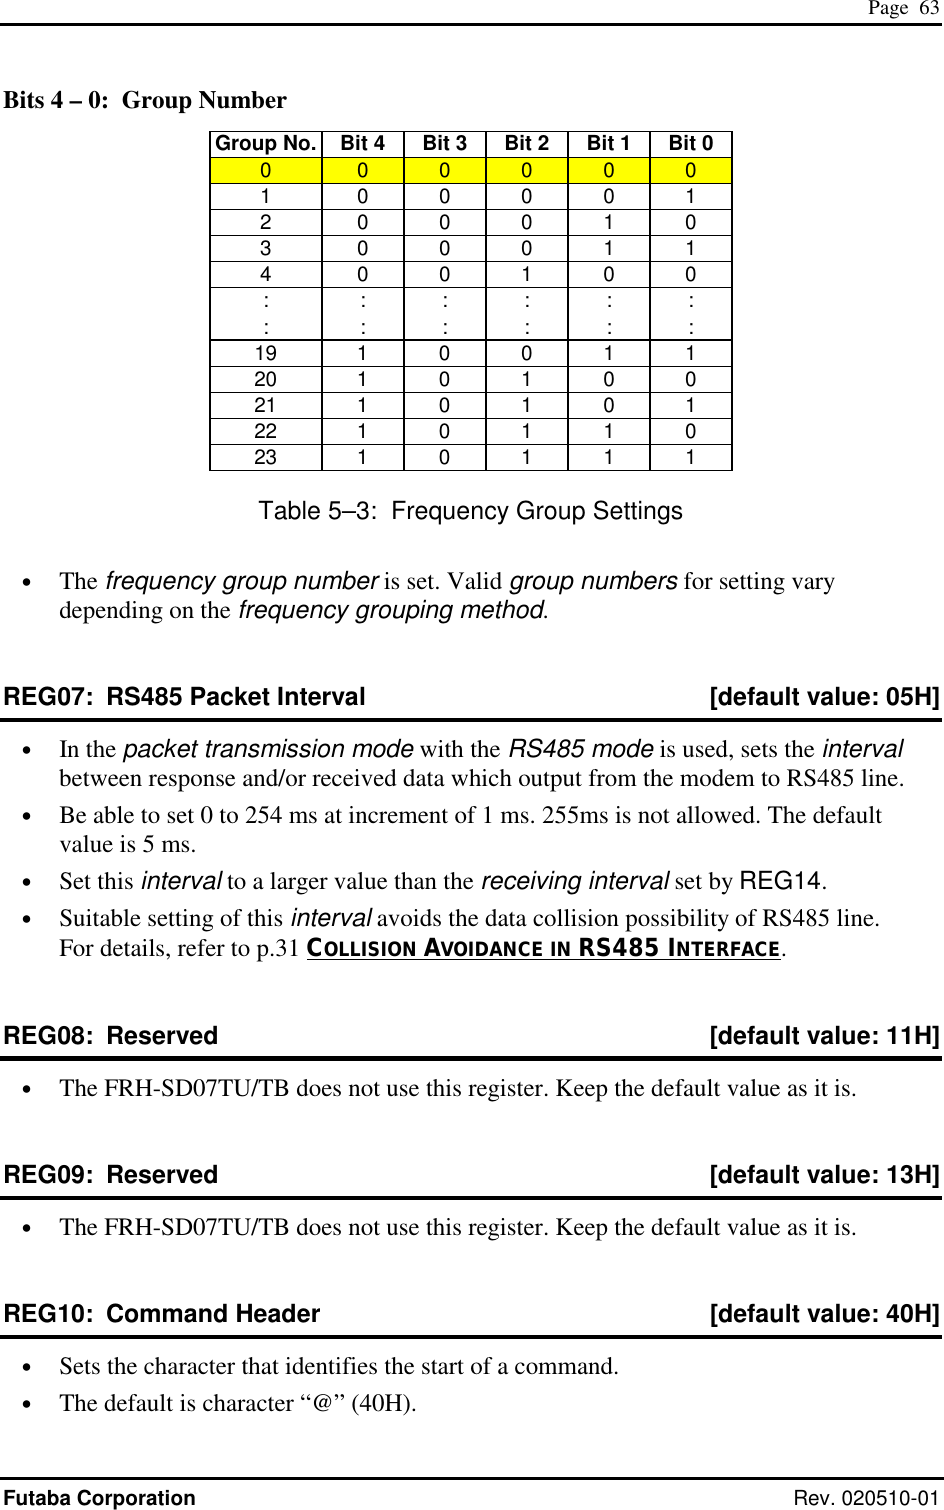  Page  63 Futaba Corporation Rev. 020510-01 Bits 4 – 0:  Group Number Group No.  Bit 4  Bit 3  Bit 2  Bit 1  Bit 0 0  0  0  0  0  0 1  0 0 0 0 1 2  0 0 0 1 0 3  0 0 0 1 1 4  0 0 1 0 0 :  : : : : : :  : : : : : 19  1 0 0 1 1 20  1 0 1 0 0 21  1 0 1 0 1 22  1 0 1 1 0 23  1 0 1 1 1 Table 5–3:  Frequency Group Settings •  The frequency group number is set. Valid group numbers for setting vary depending on the frequency grouping method. REG07:  RS485 Packet Interval  [default value: 05H] •  In the packet transmission mode with the RS485 mode is used, sets the interval between response and/or received data which output from the modem to RS485 line.  •  Be able to set 0 to 254 ms at increment of 1 ms. 255ms is not allowed. The default value is 5 ms. •  Set this interval to a larger value than the receiving interval set by REG14.   •  Suitable setting of this interval avoids the data collision possibility of RS485 line.  For details, refer to p.31 COLLISION AVOIDANCE IN RS485 INTERFACE. REG08:  Reserved  [default value: 11H] •  The FRH-SD07TU/TB does not use this register. Keep the default value as it is. REG09:  Reserved  [default value: 13H] •  The FRH-SD07TU/TB does not use this register. Keep the default value as it is. REG10:  Command Header  [default value: 40H] •  Sets the character that identifies the start of a command. •  The default is character “@” (40H). 